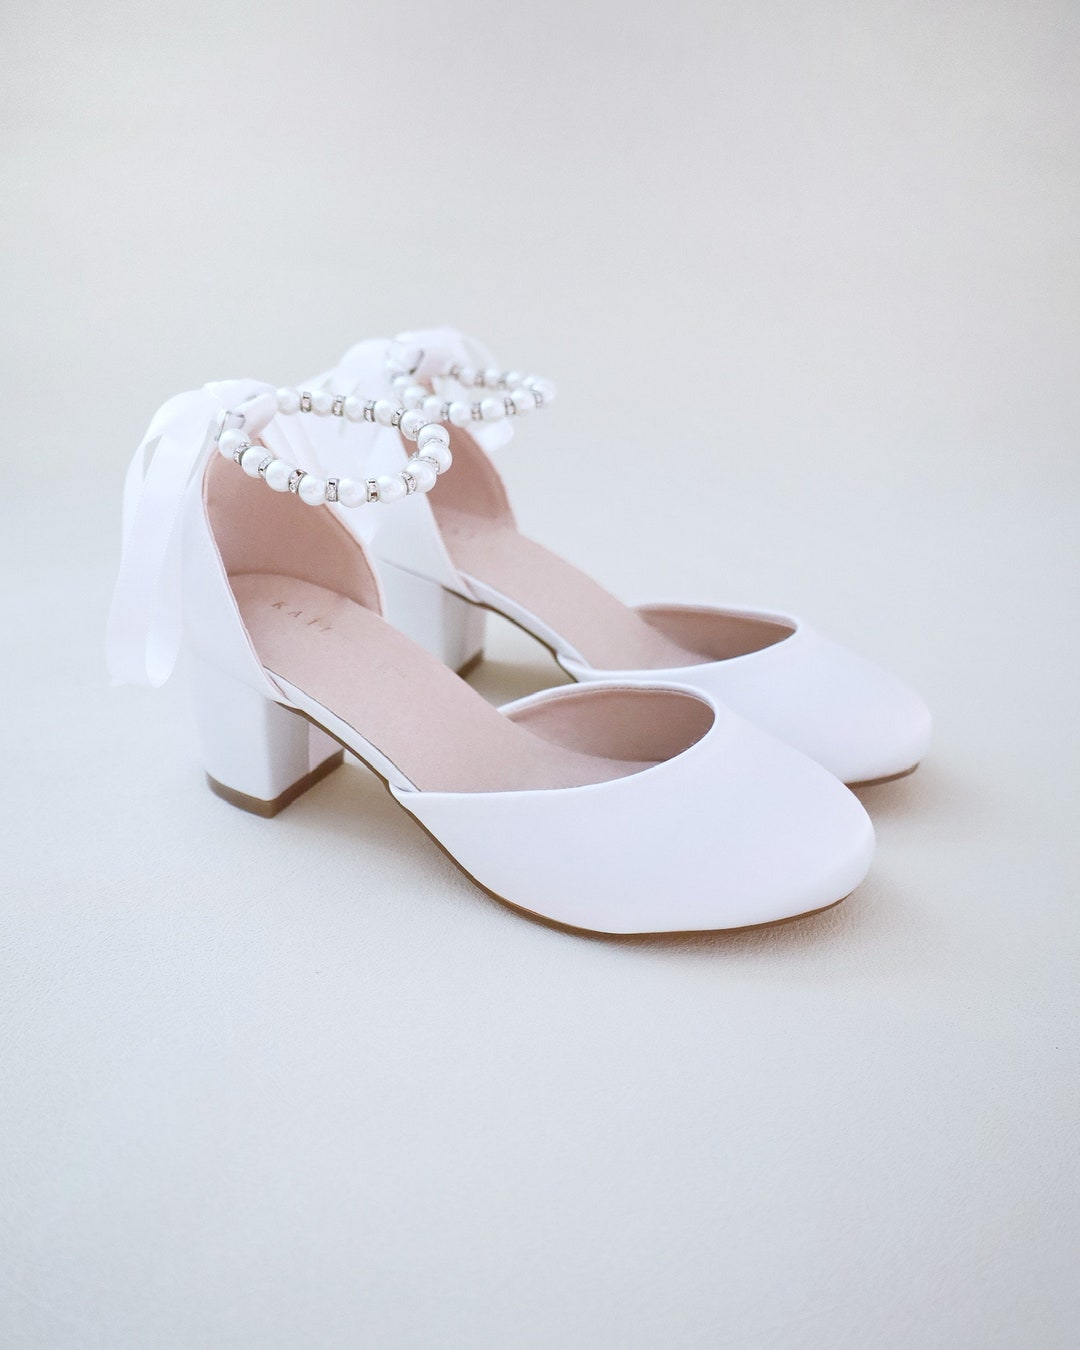 AA FASHION WHITE COLOR BLOCK HEEL FOR WOMEN AND GIRLS HEEL FOR OFFICE WOMEN  CASUAL HEEL